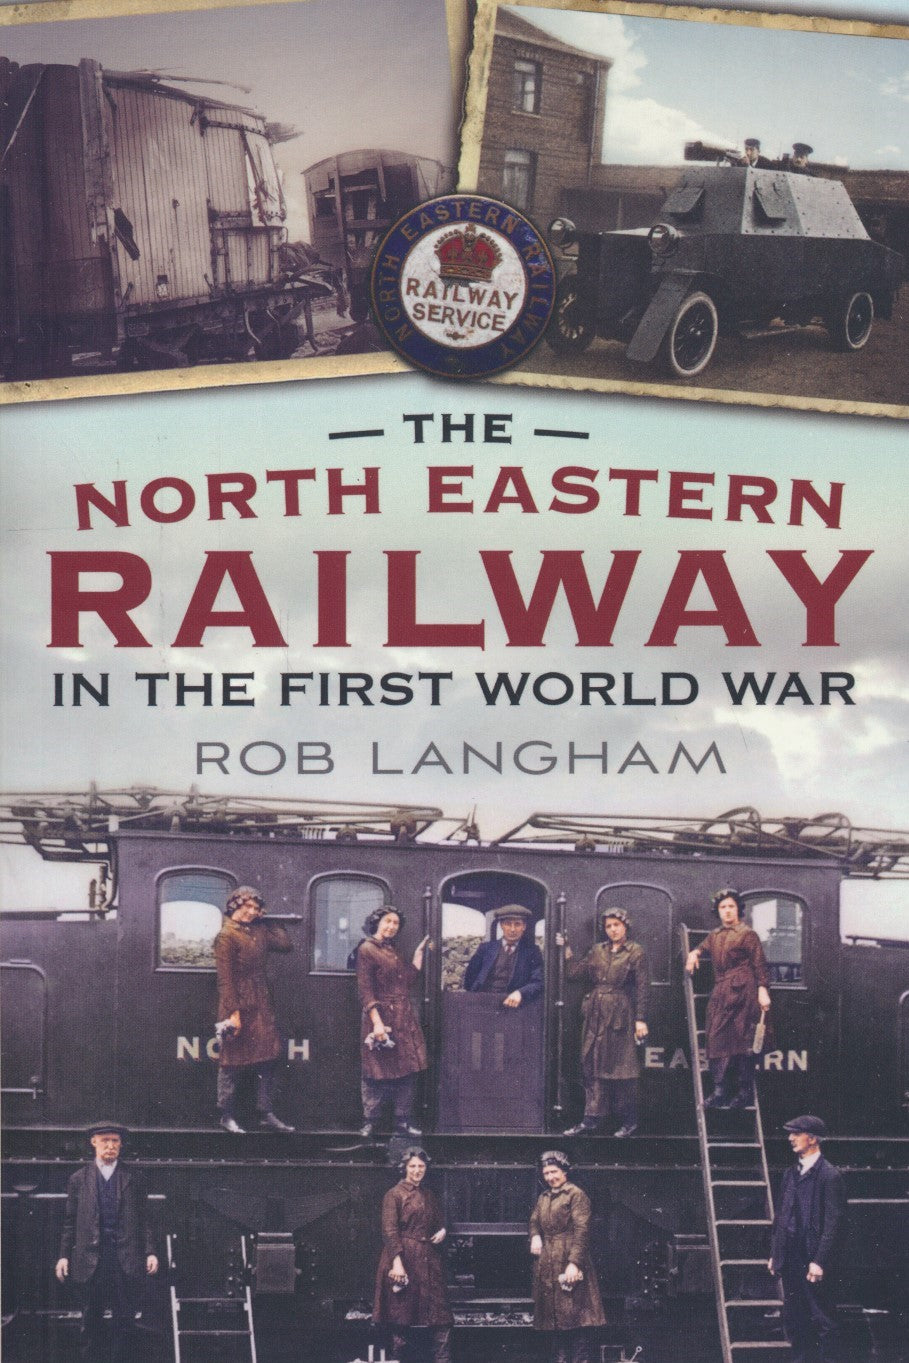 The North Eastern Railway in the First World War